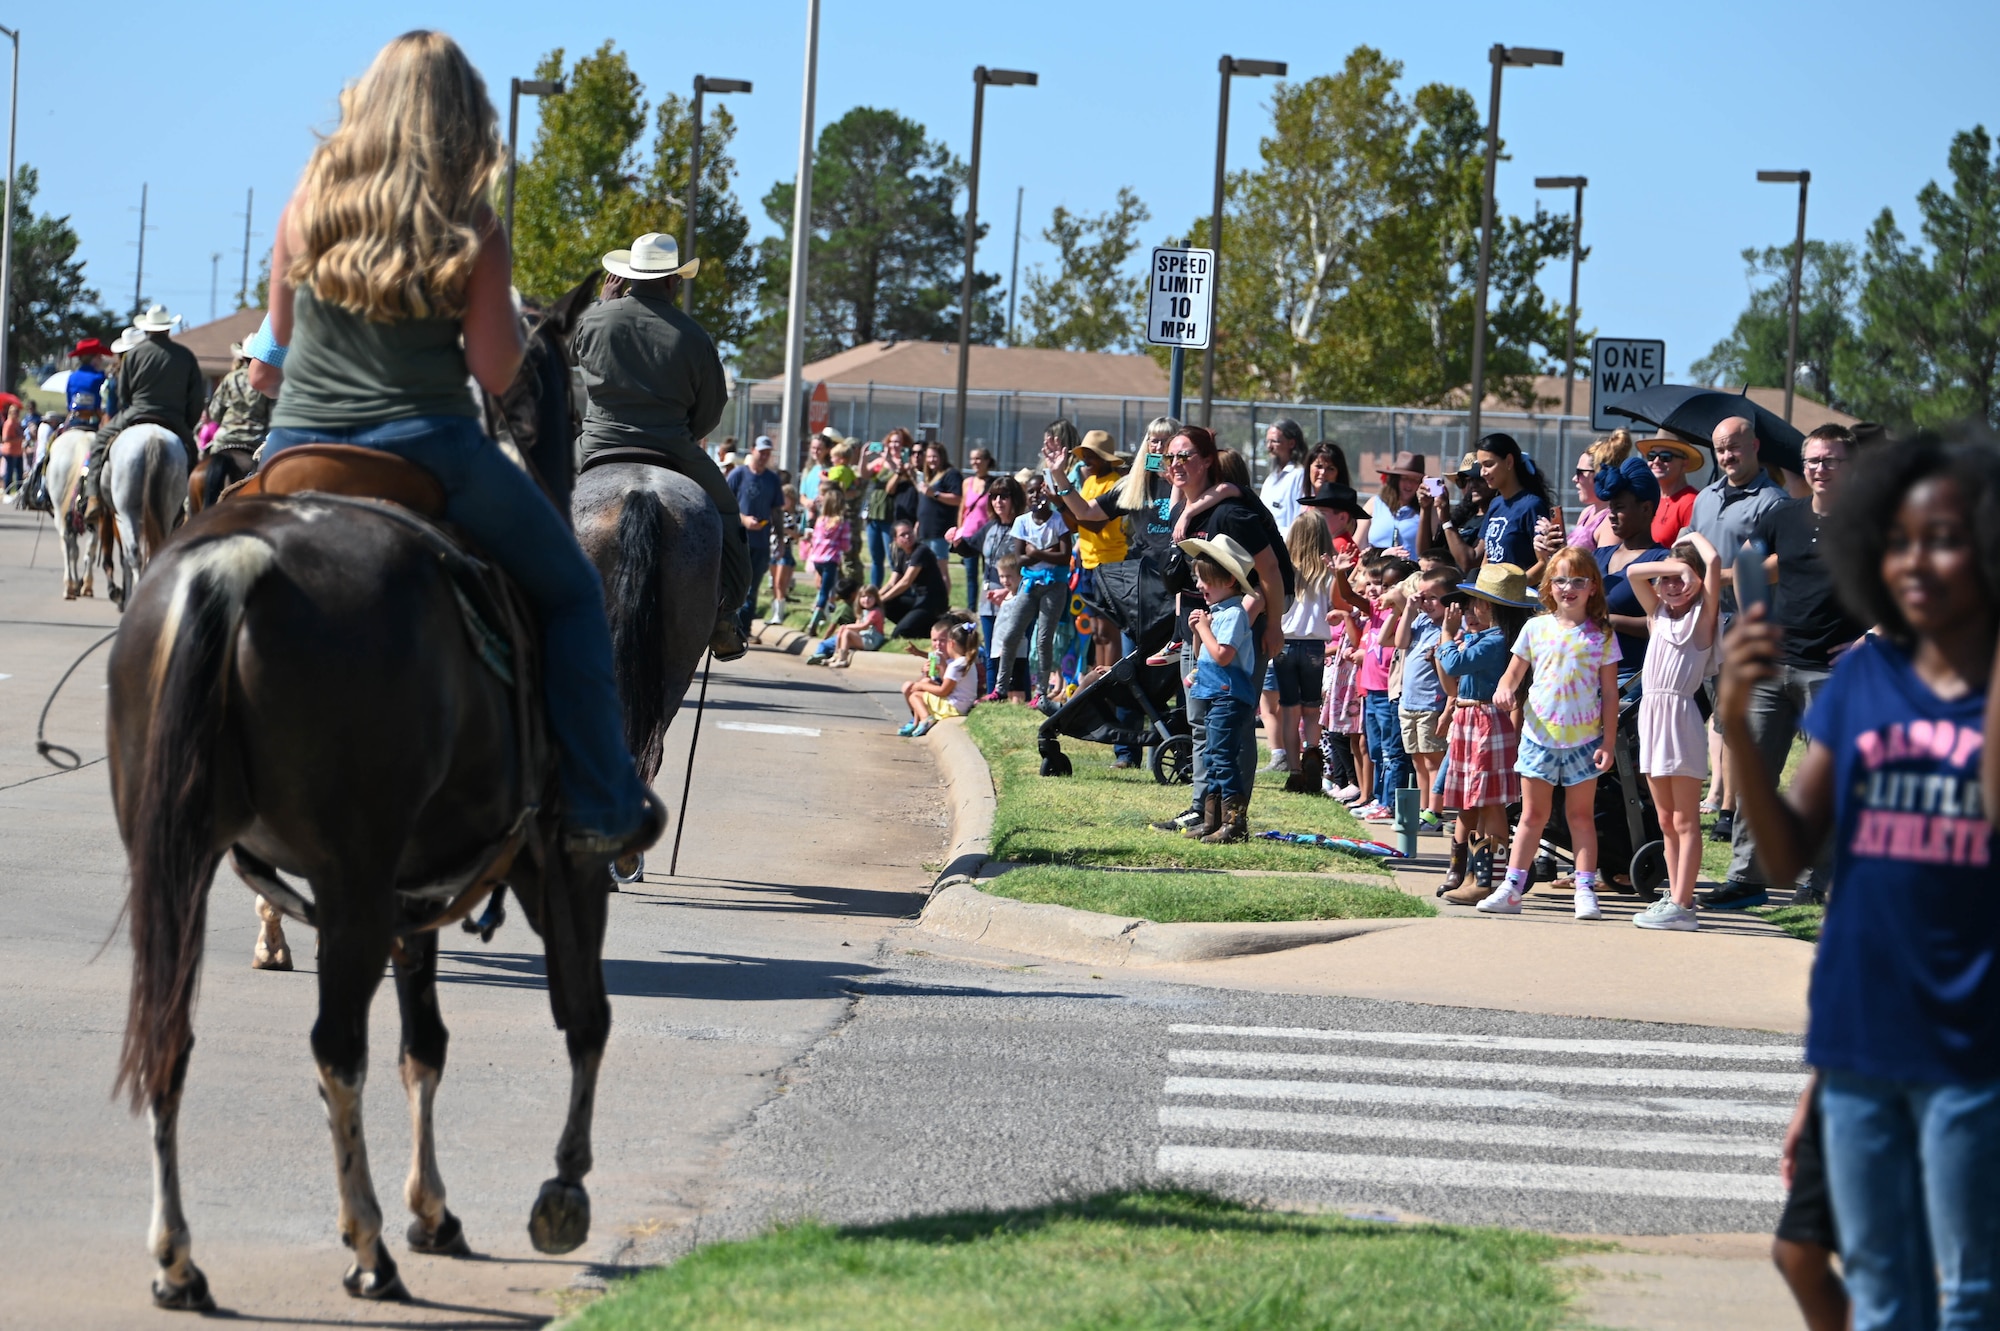 Children from L. Mendel Rivers Elementary School observe 97th Air Mobility Wing leaders and local ranchers ride horses during the 25th annual Cattle Drive at Altus Air Force Base, Oklahoma, Aug. 24, 2023. The kids were able to pet horses and meet with members running the cattle drive. (U.S. Air Force photo by Airman 1st Class Heidi Bucins)